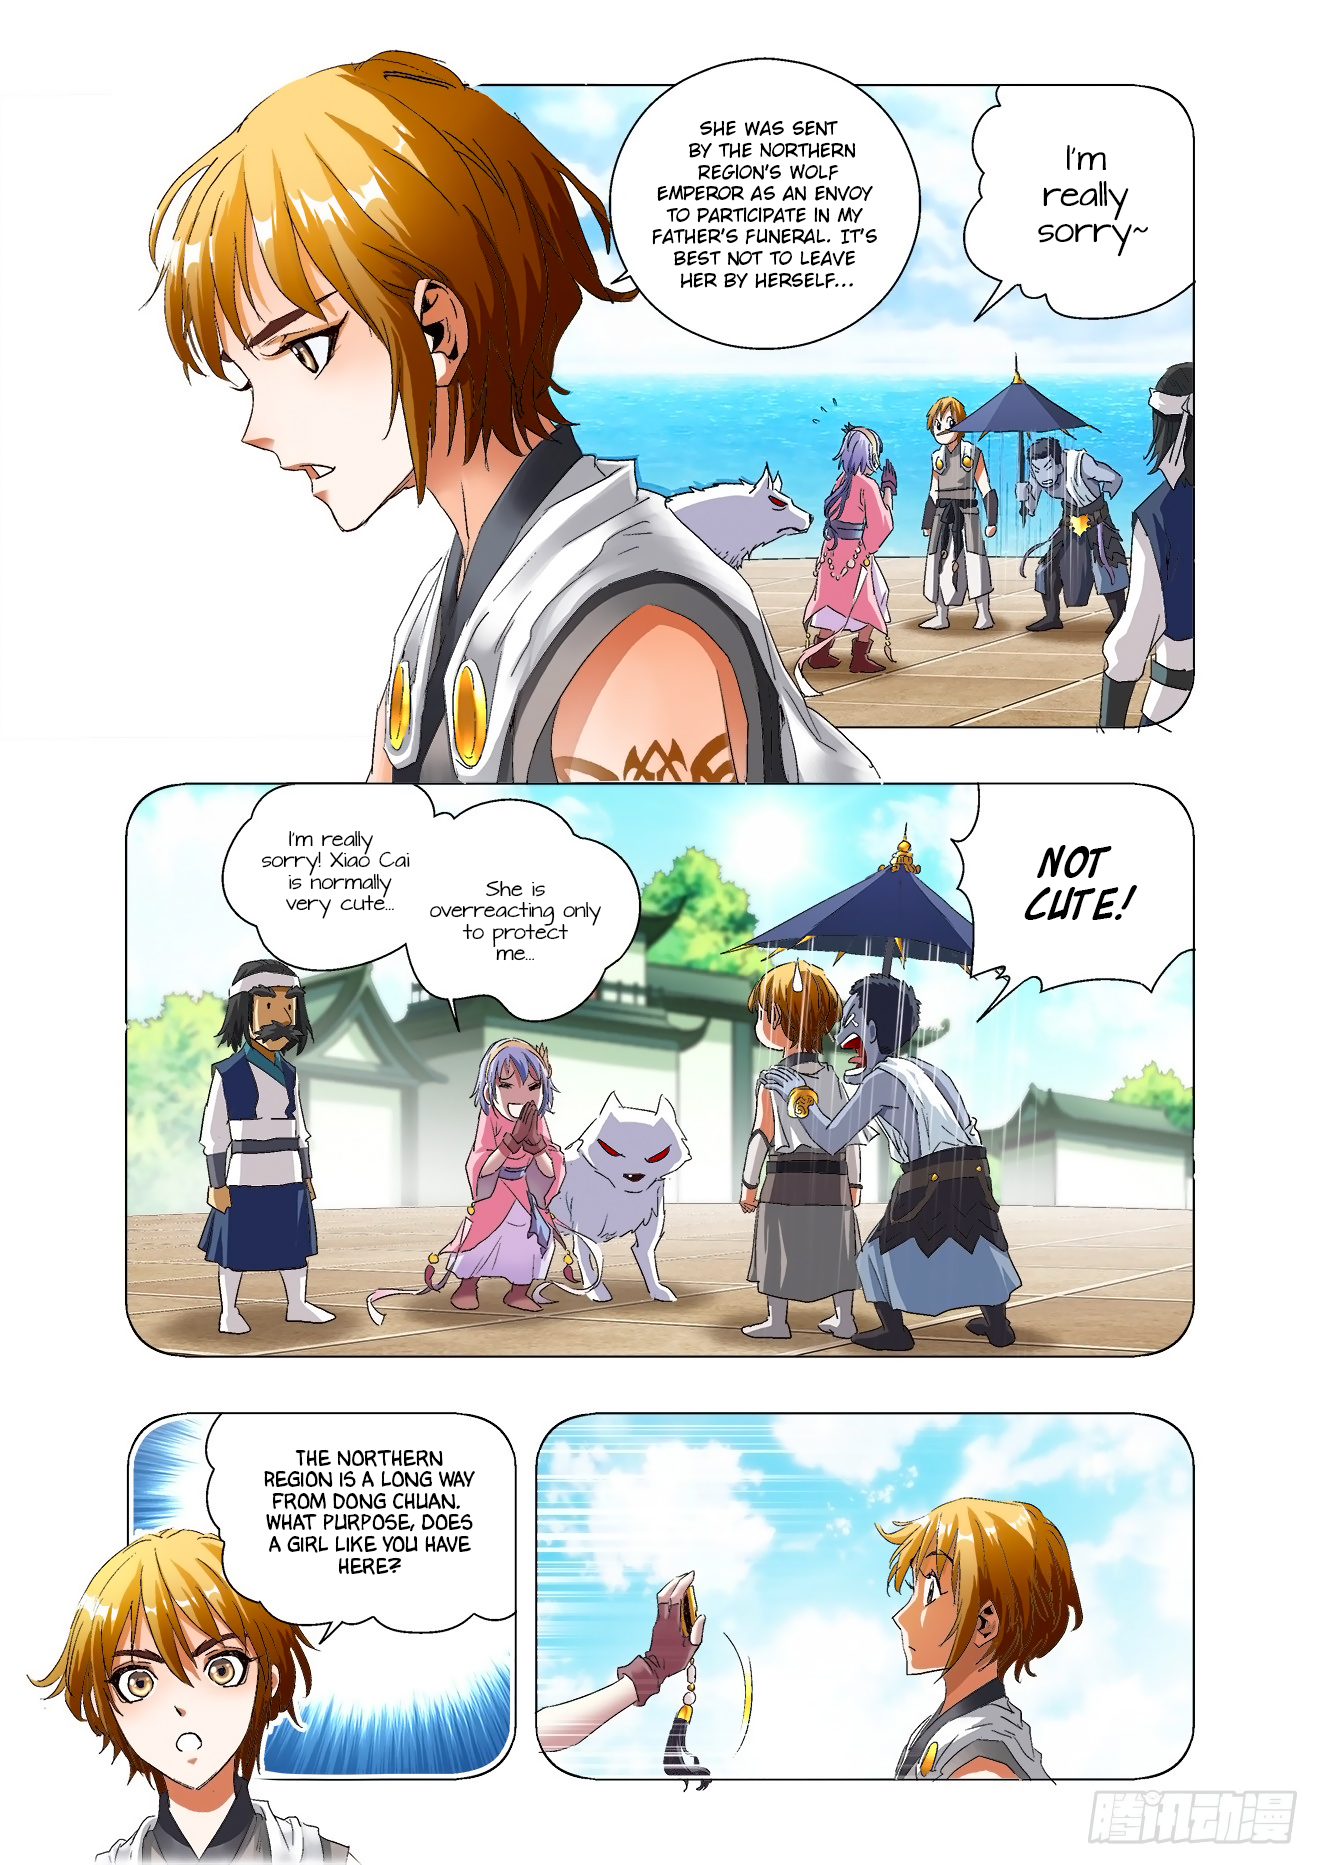 Battle Through The Heavens: Return Of The Beasts Chapter 3.1: Wolf girl Xiao Zhao